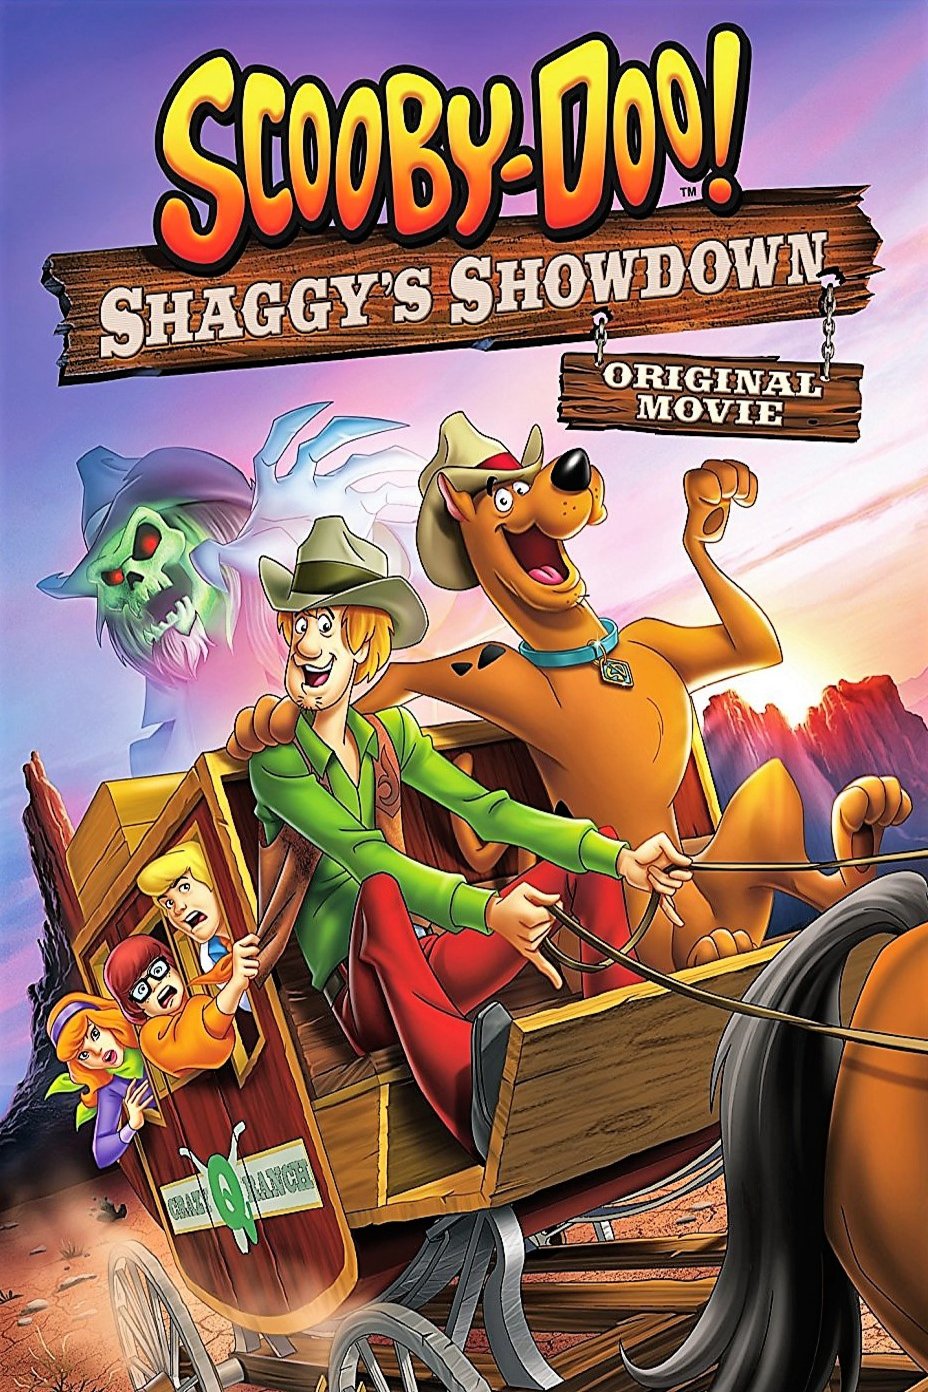 Poster of the movie Scooby-Doo! Shaggy's Showdown